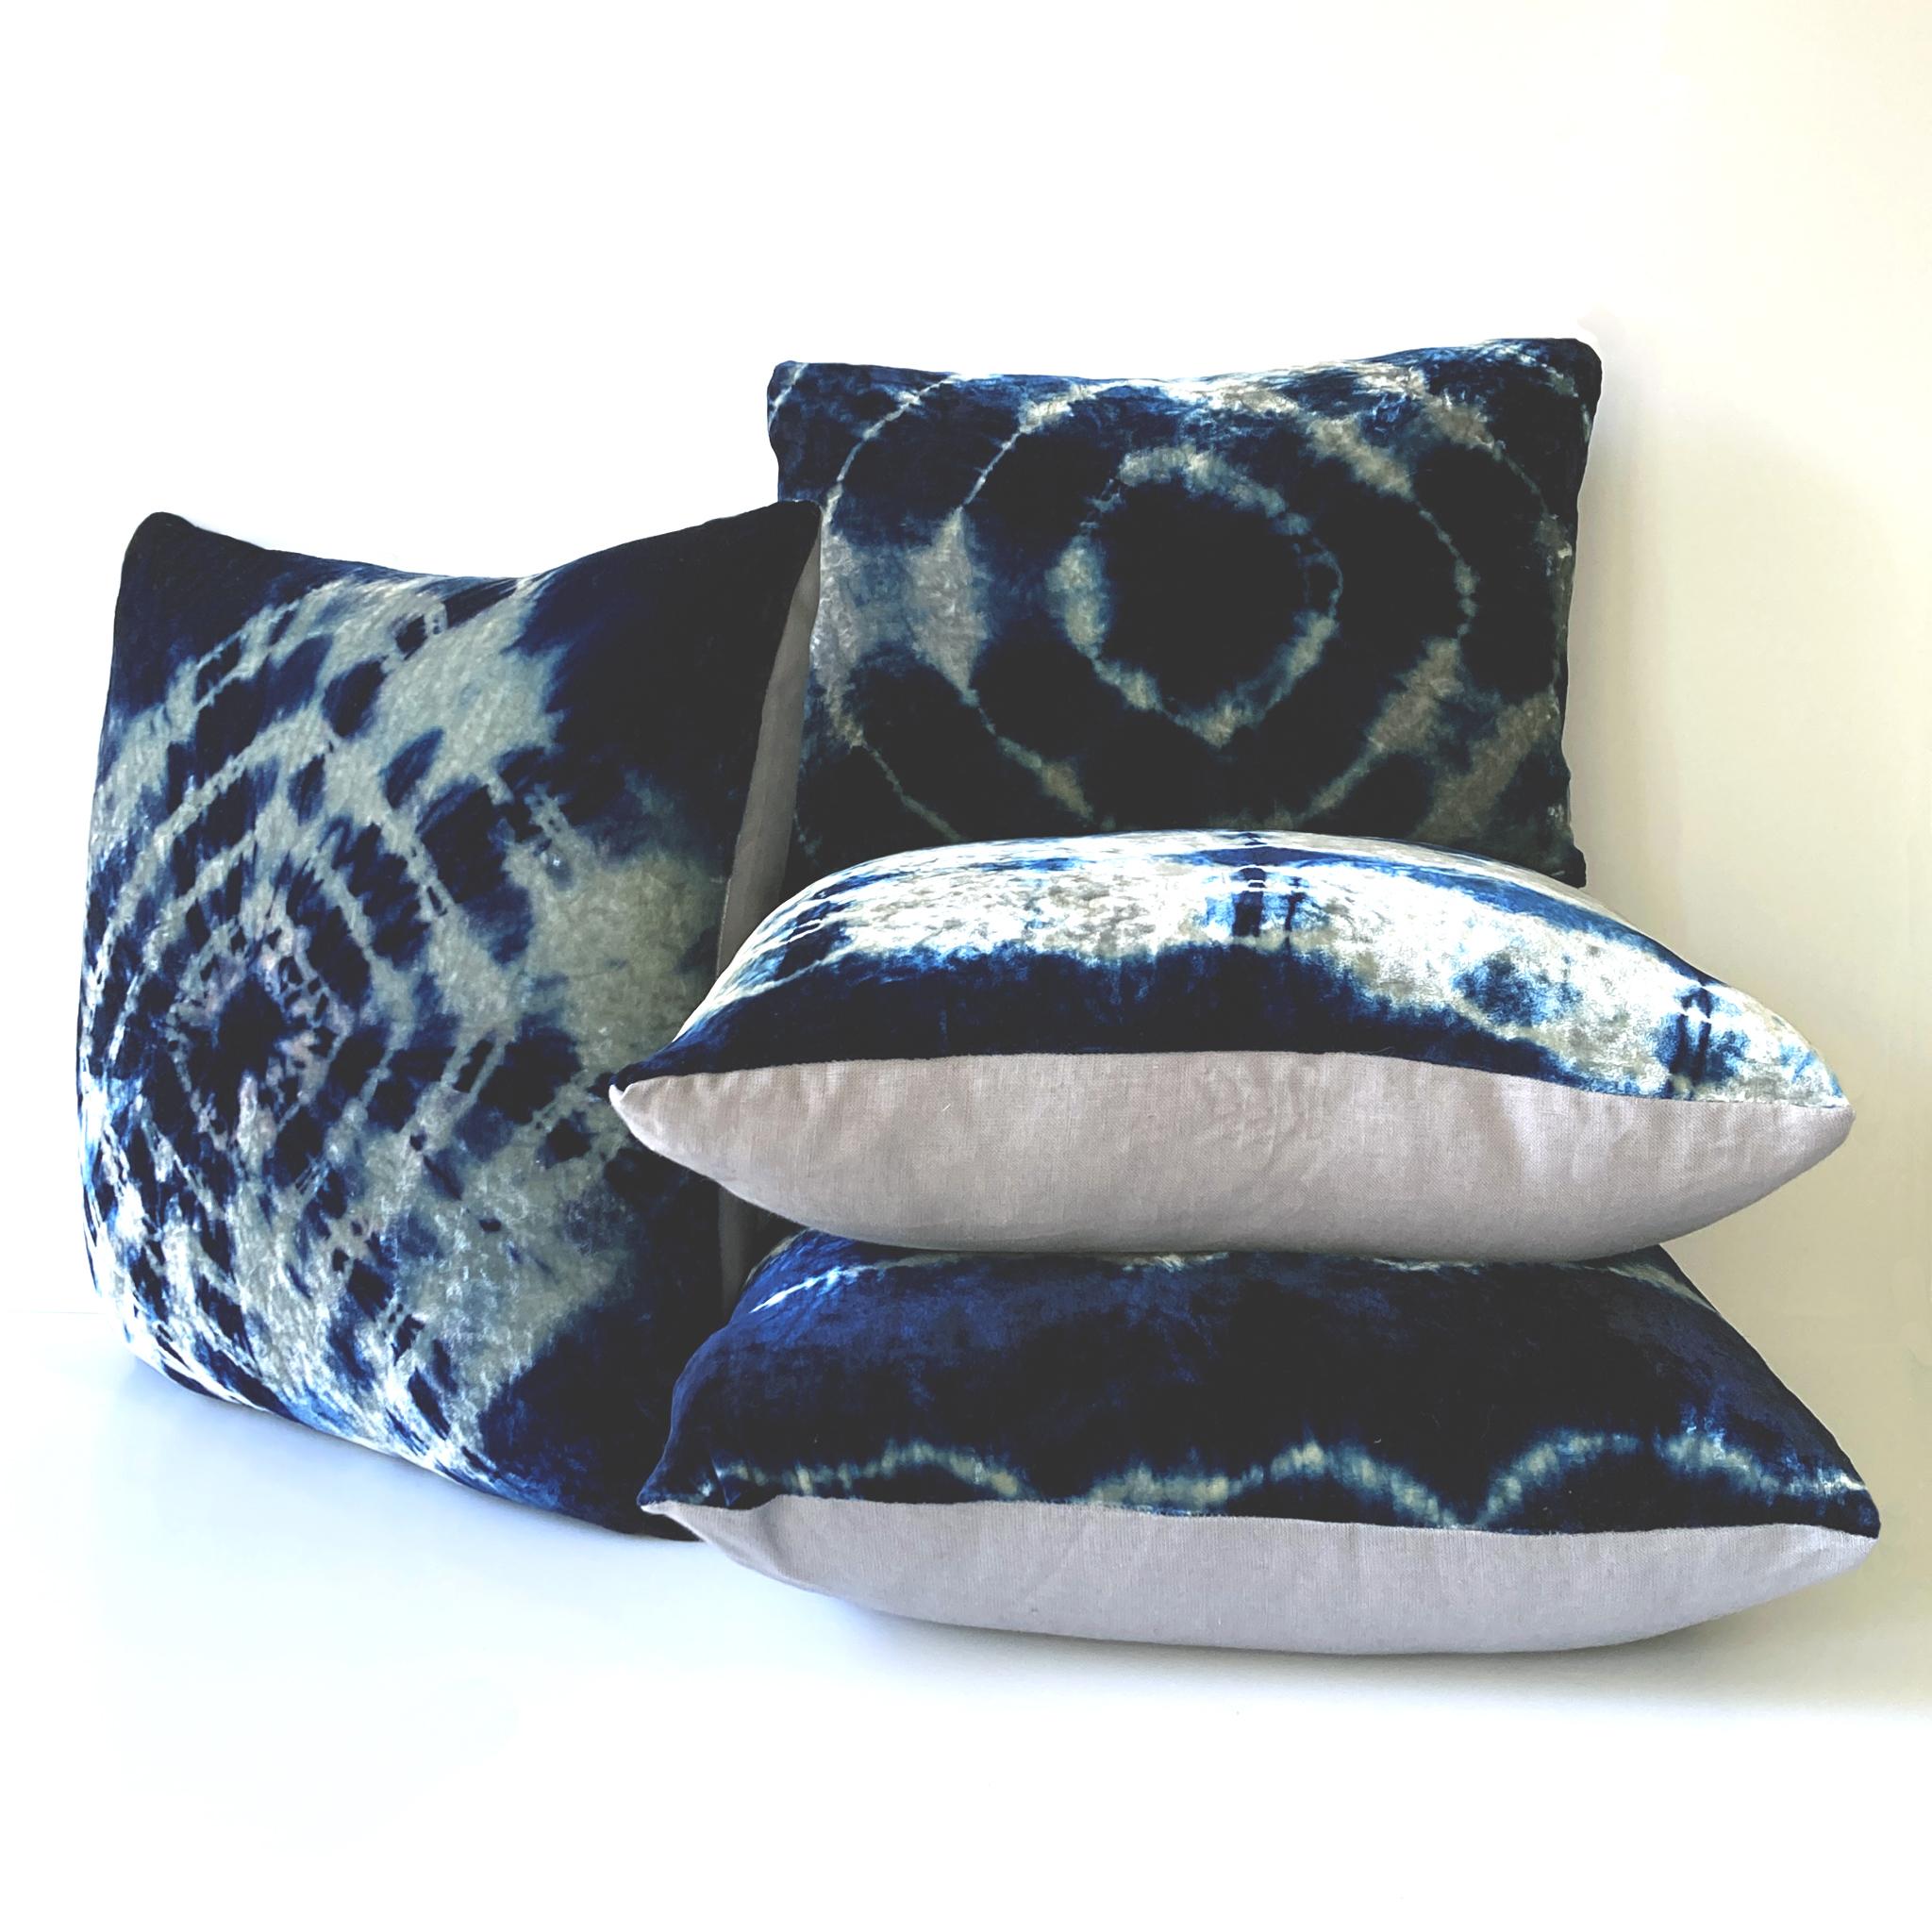 Silver gray velvet pillow dyed with indigo in Halo pattern with gray linen backing. Hand-dyed and sewn in New York City, down pillow insert made locally in NYC. Pillow measures 18 x 18 inches. Each velvet pillow is hand made and one of a